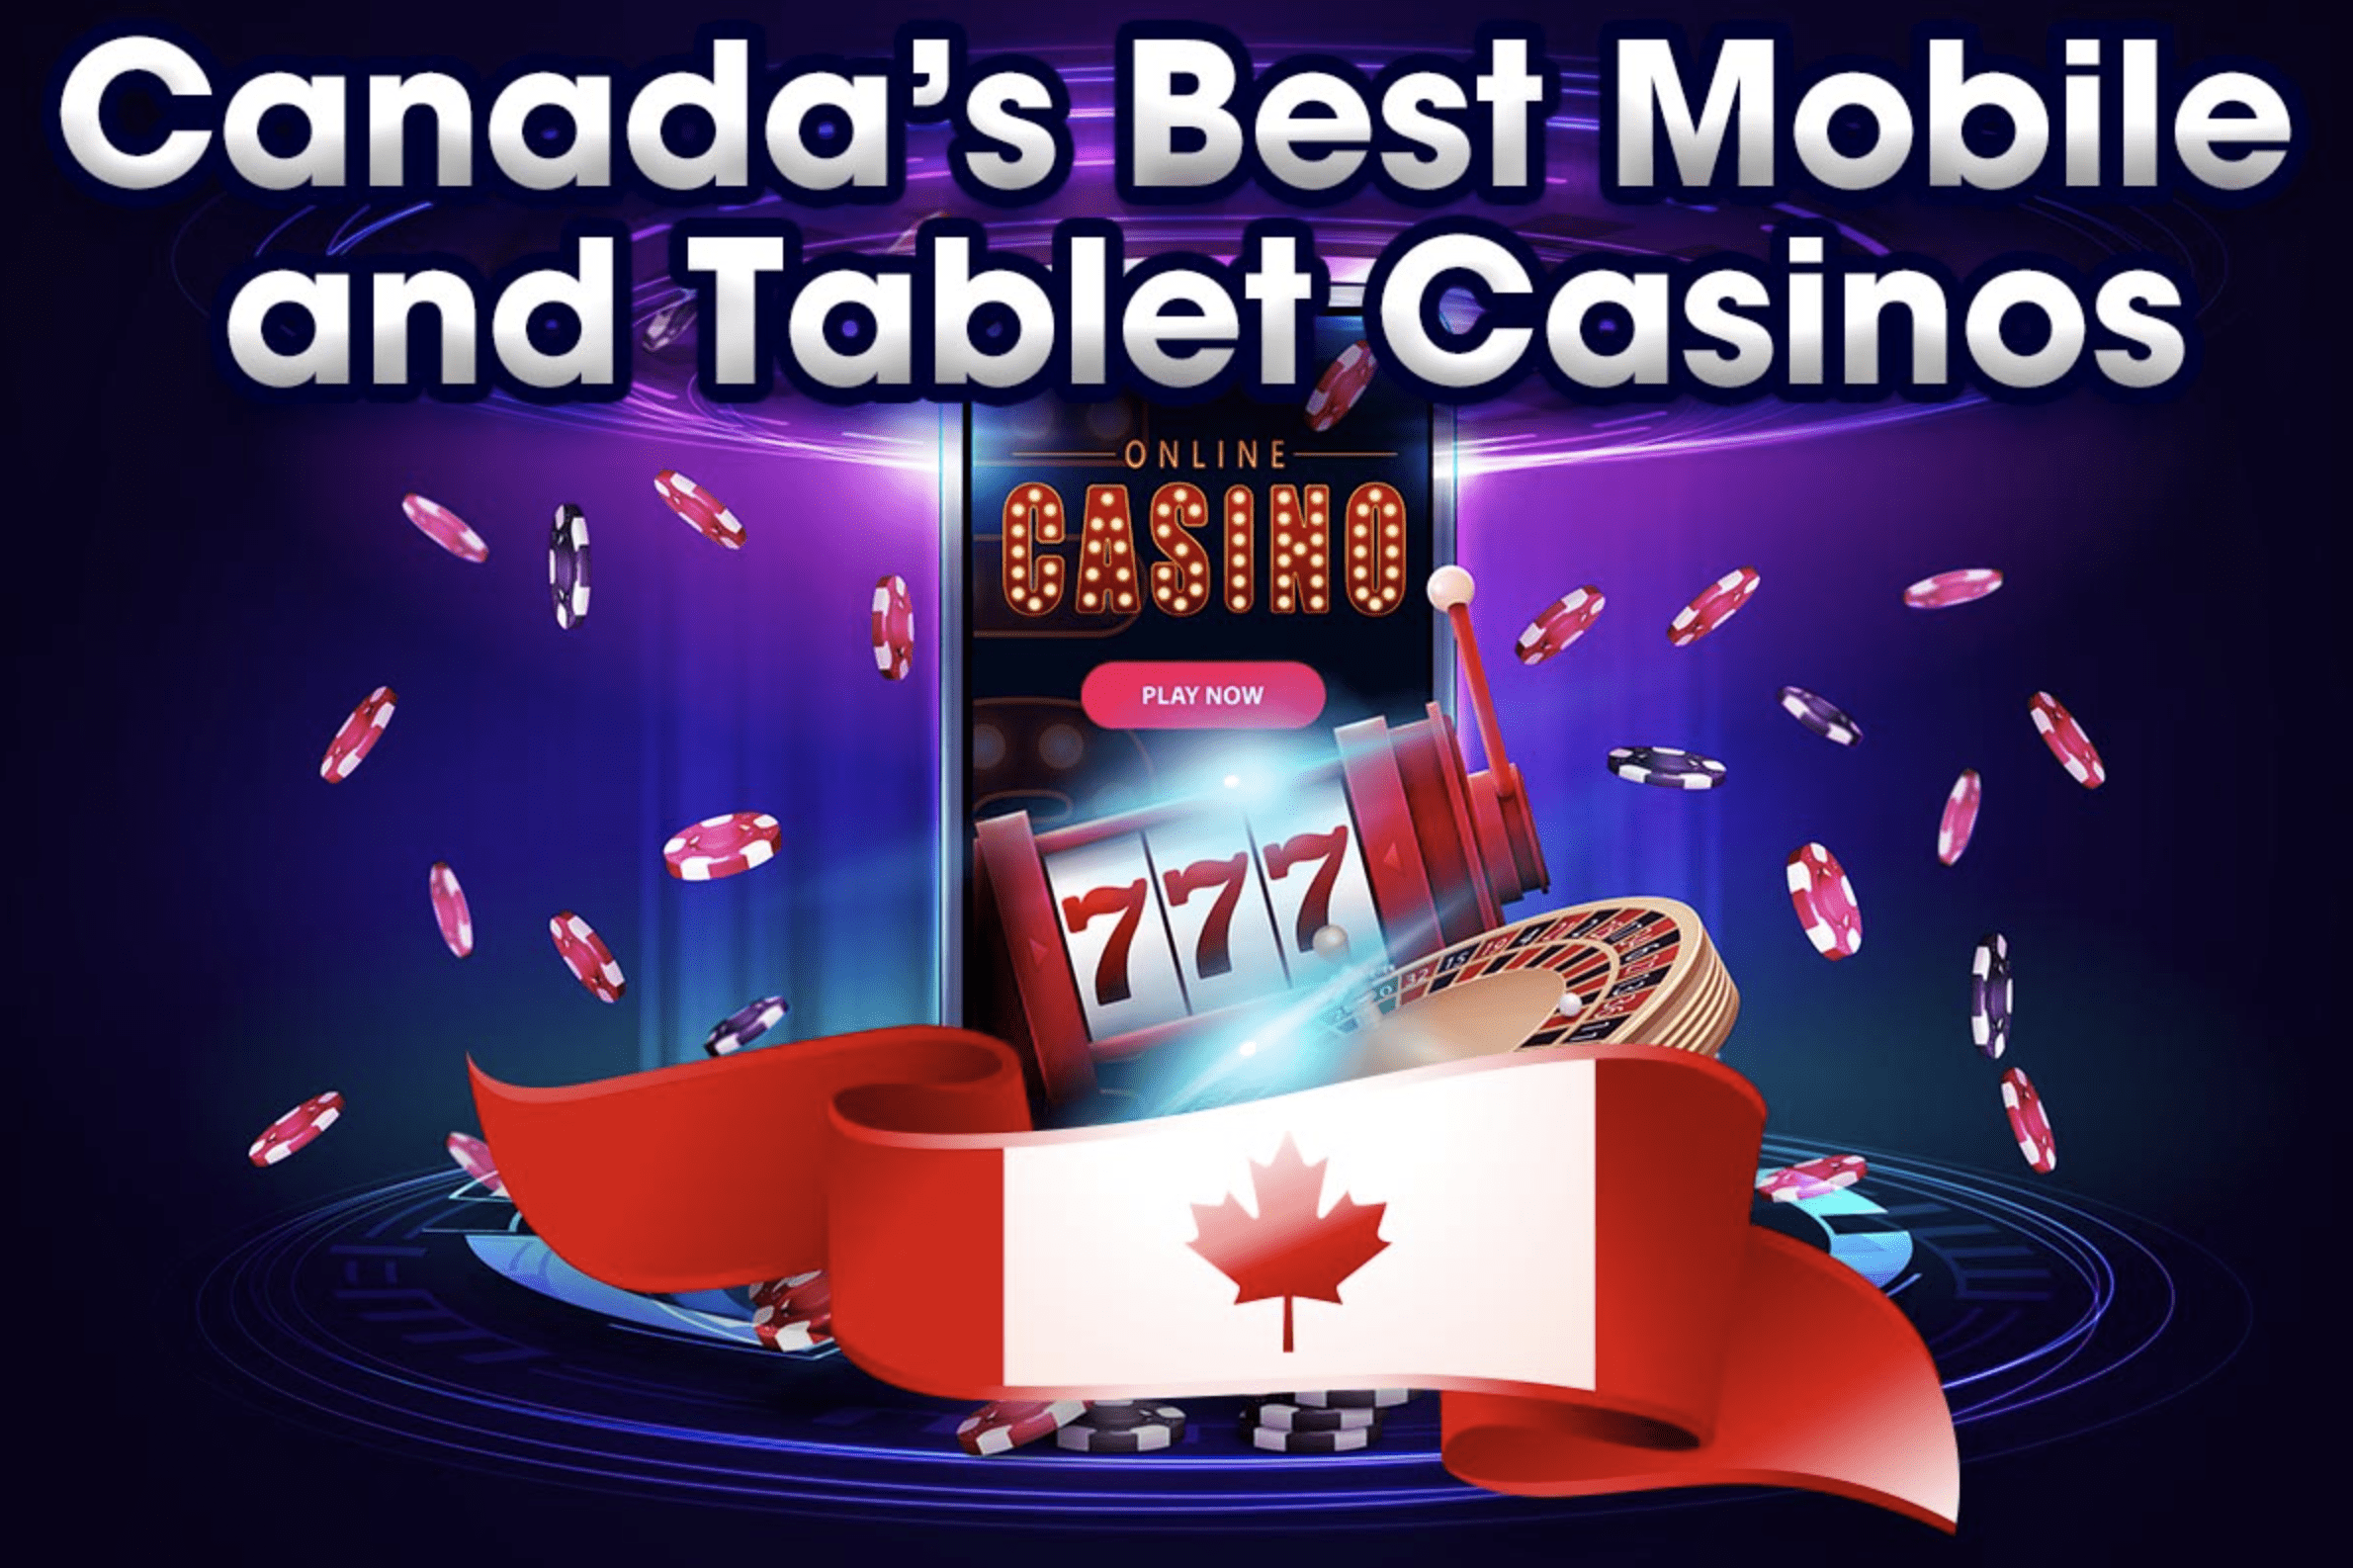 How To Find The Time To canadian gambling sites On Google